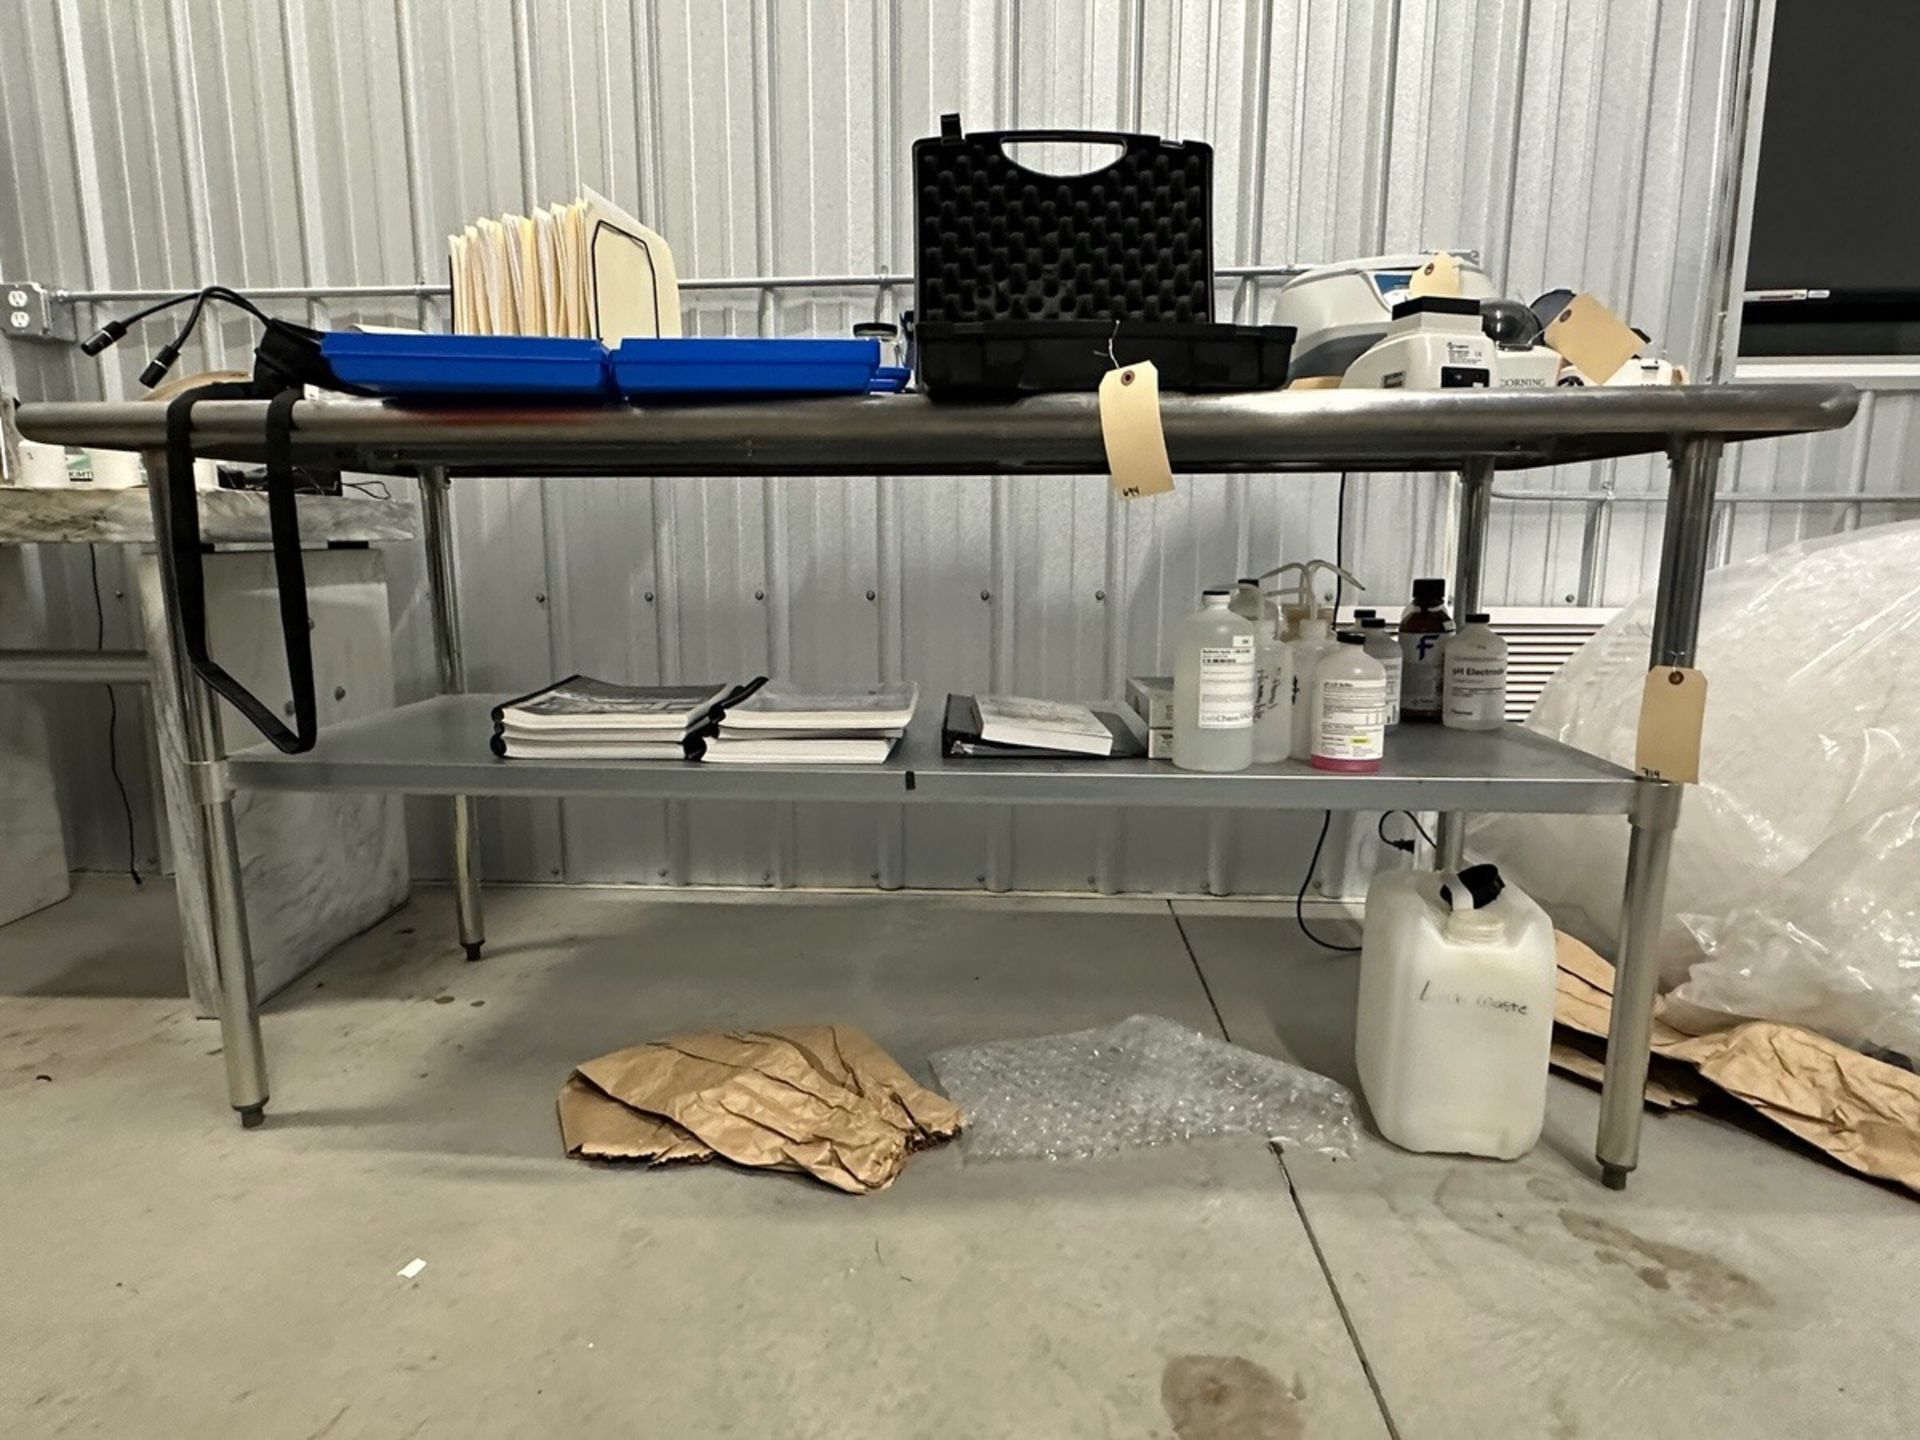 Stainless Steel Table | Rig Fee $150 - Image 3 of 3